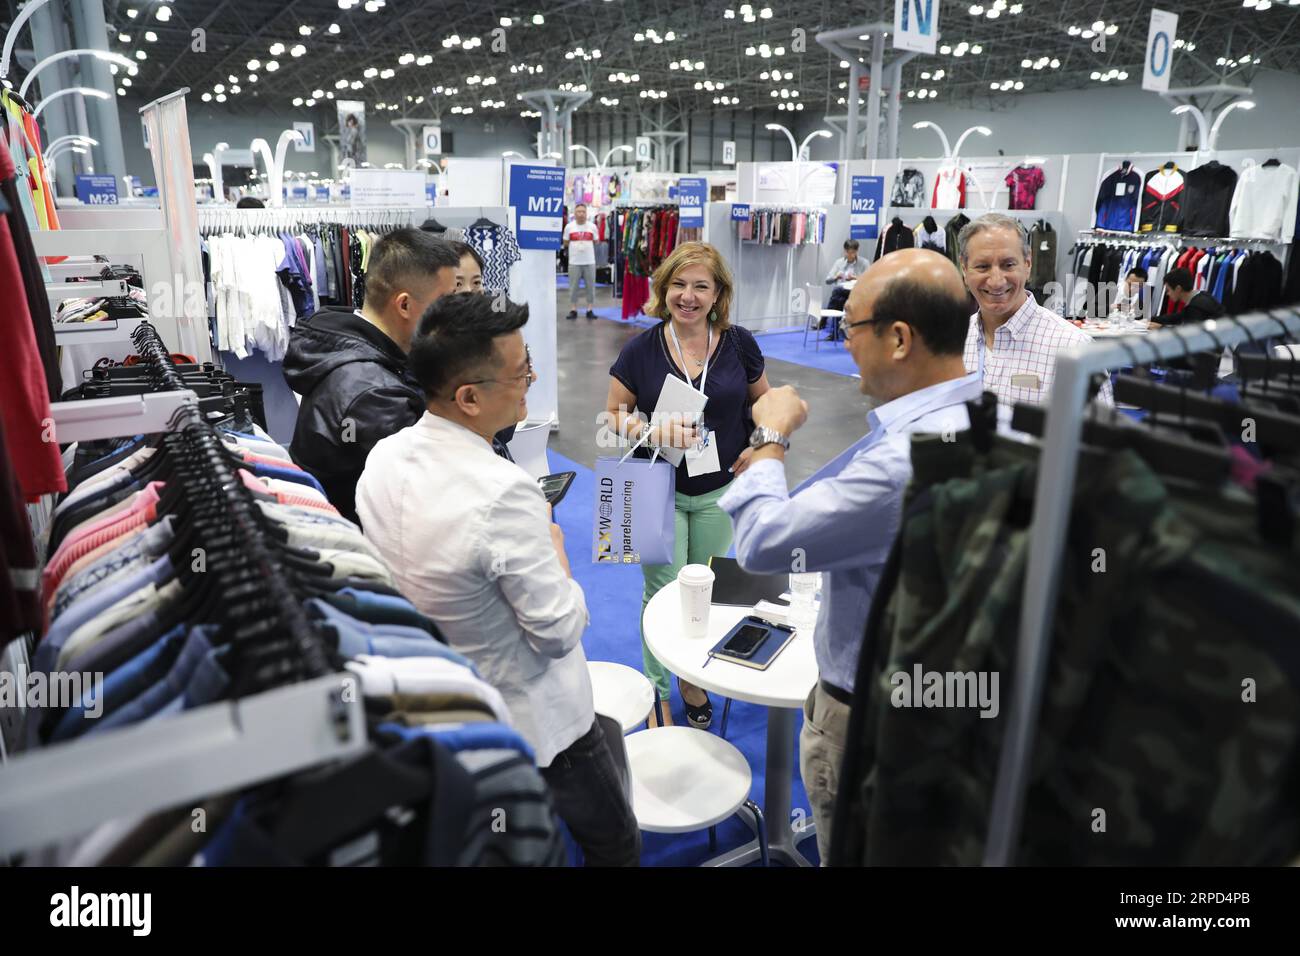 (190722) -- NEW YORK, July 22, 2019 -- People visit a booth of a Chinese company during the 20th China Textile and Apparel Trade Show in New York, the United States, July 22, 2019. The 20th China Textile and Apparel Trade Show in New York opened on Monday in Manhattan s Javits Center, serving as a platform to showcase the latest industrial trends and help Chinese companies explore the U.S. market. Over 500 Chinese garment, fabric and textile companies are attending this year s trade show, which will run through Wednesday. Another 300 or so companies from 16 countries and regions also joined th Stock Photo